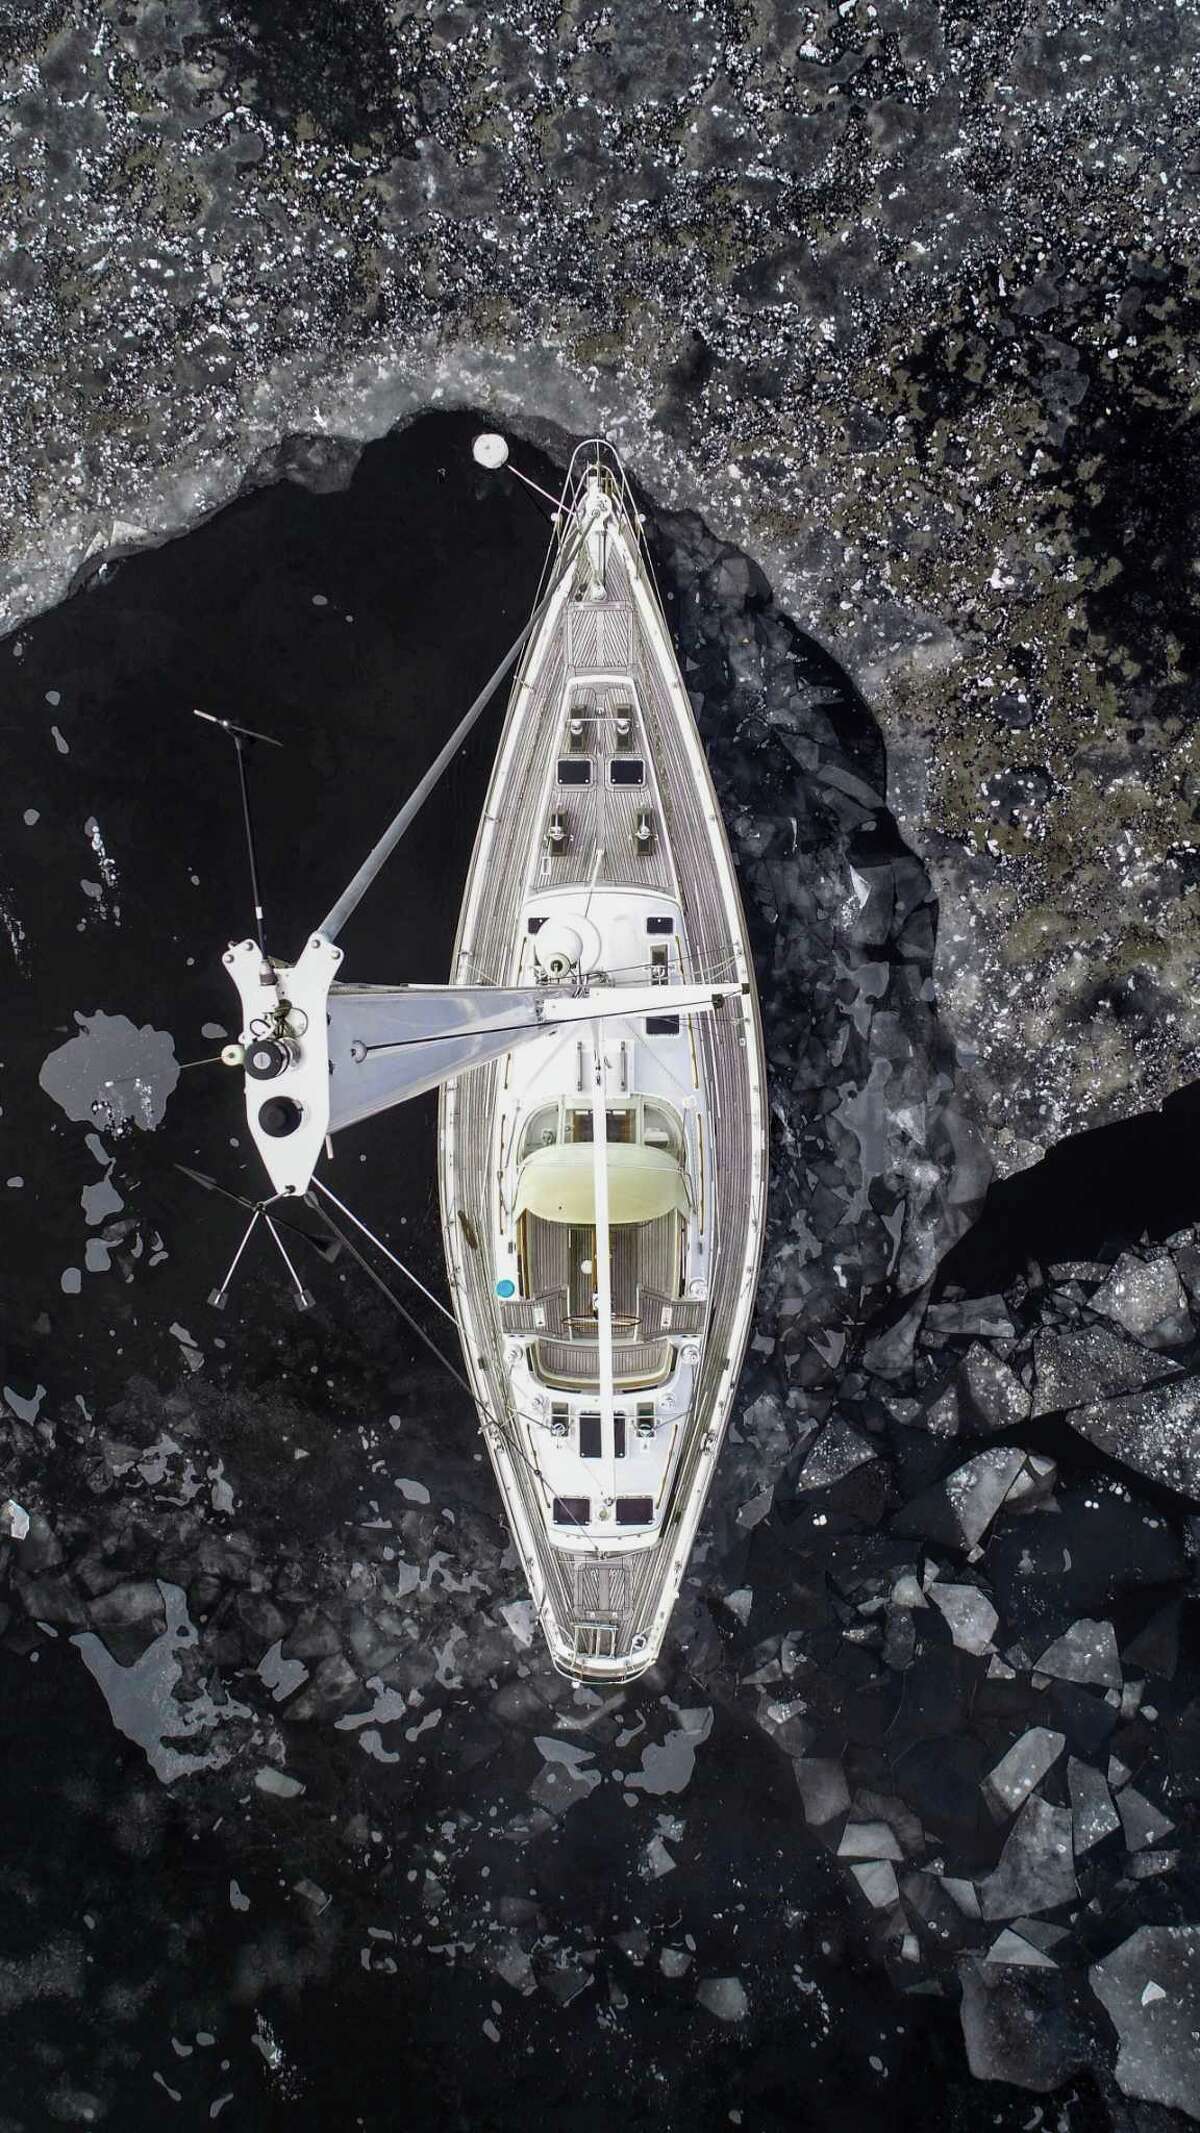 Amateur photographer Frank Dinardi of East Haddam captured before and after shots and drone video of a 52-foot sailing yacht which sunk late last month in Hamburg Cove in Lyme. His dramatic video, which has garnered more than 141,000 hits on YouTube, has inspired great interest in the “mysterious” incident.